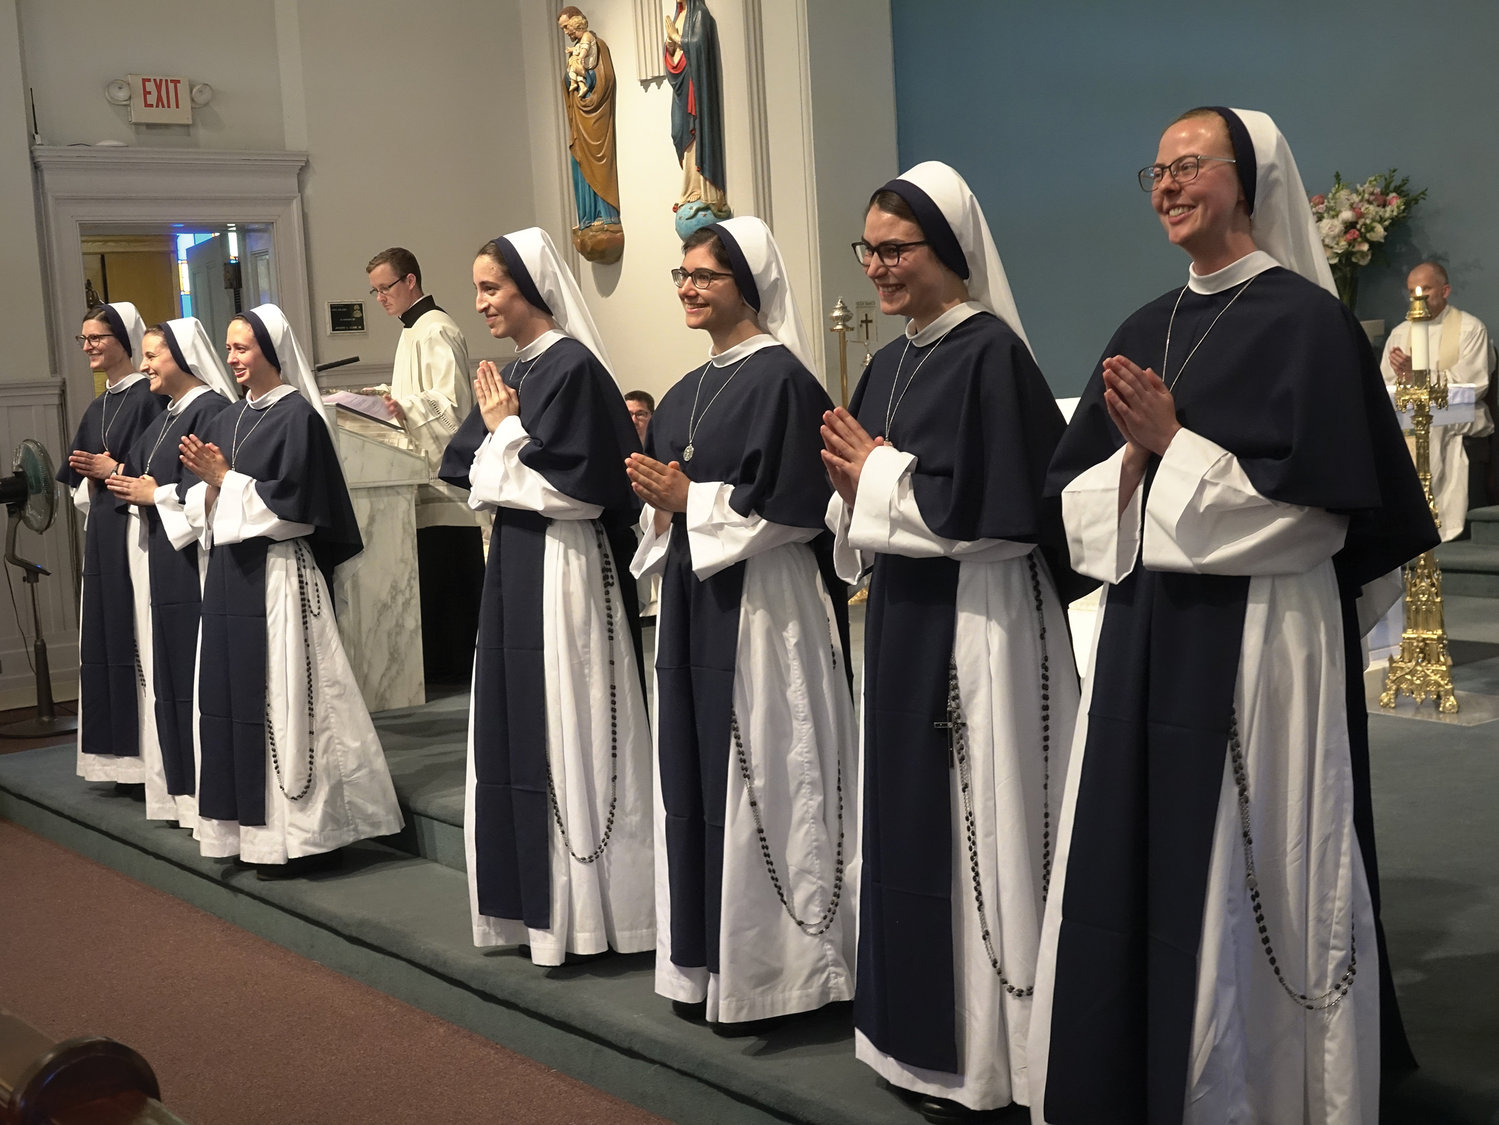 The seven Sisters of Life who made their first vows June 25 greet the faithful at Sacred Heart Church in Suffern. They were, from left: Sister Anne Marie Elizabeth, Sister Zion Joy, Sister Mary Hostia Josephine, Sister Caeli Gloriae, Sister Lilia Consolata, Sister Isabel Fiat Karolina and Sister Miriam Bethel.